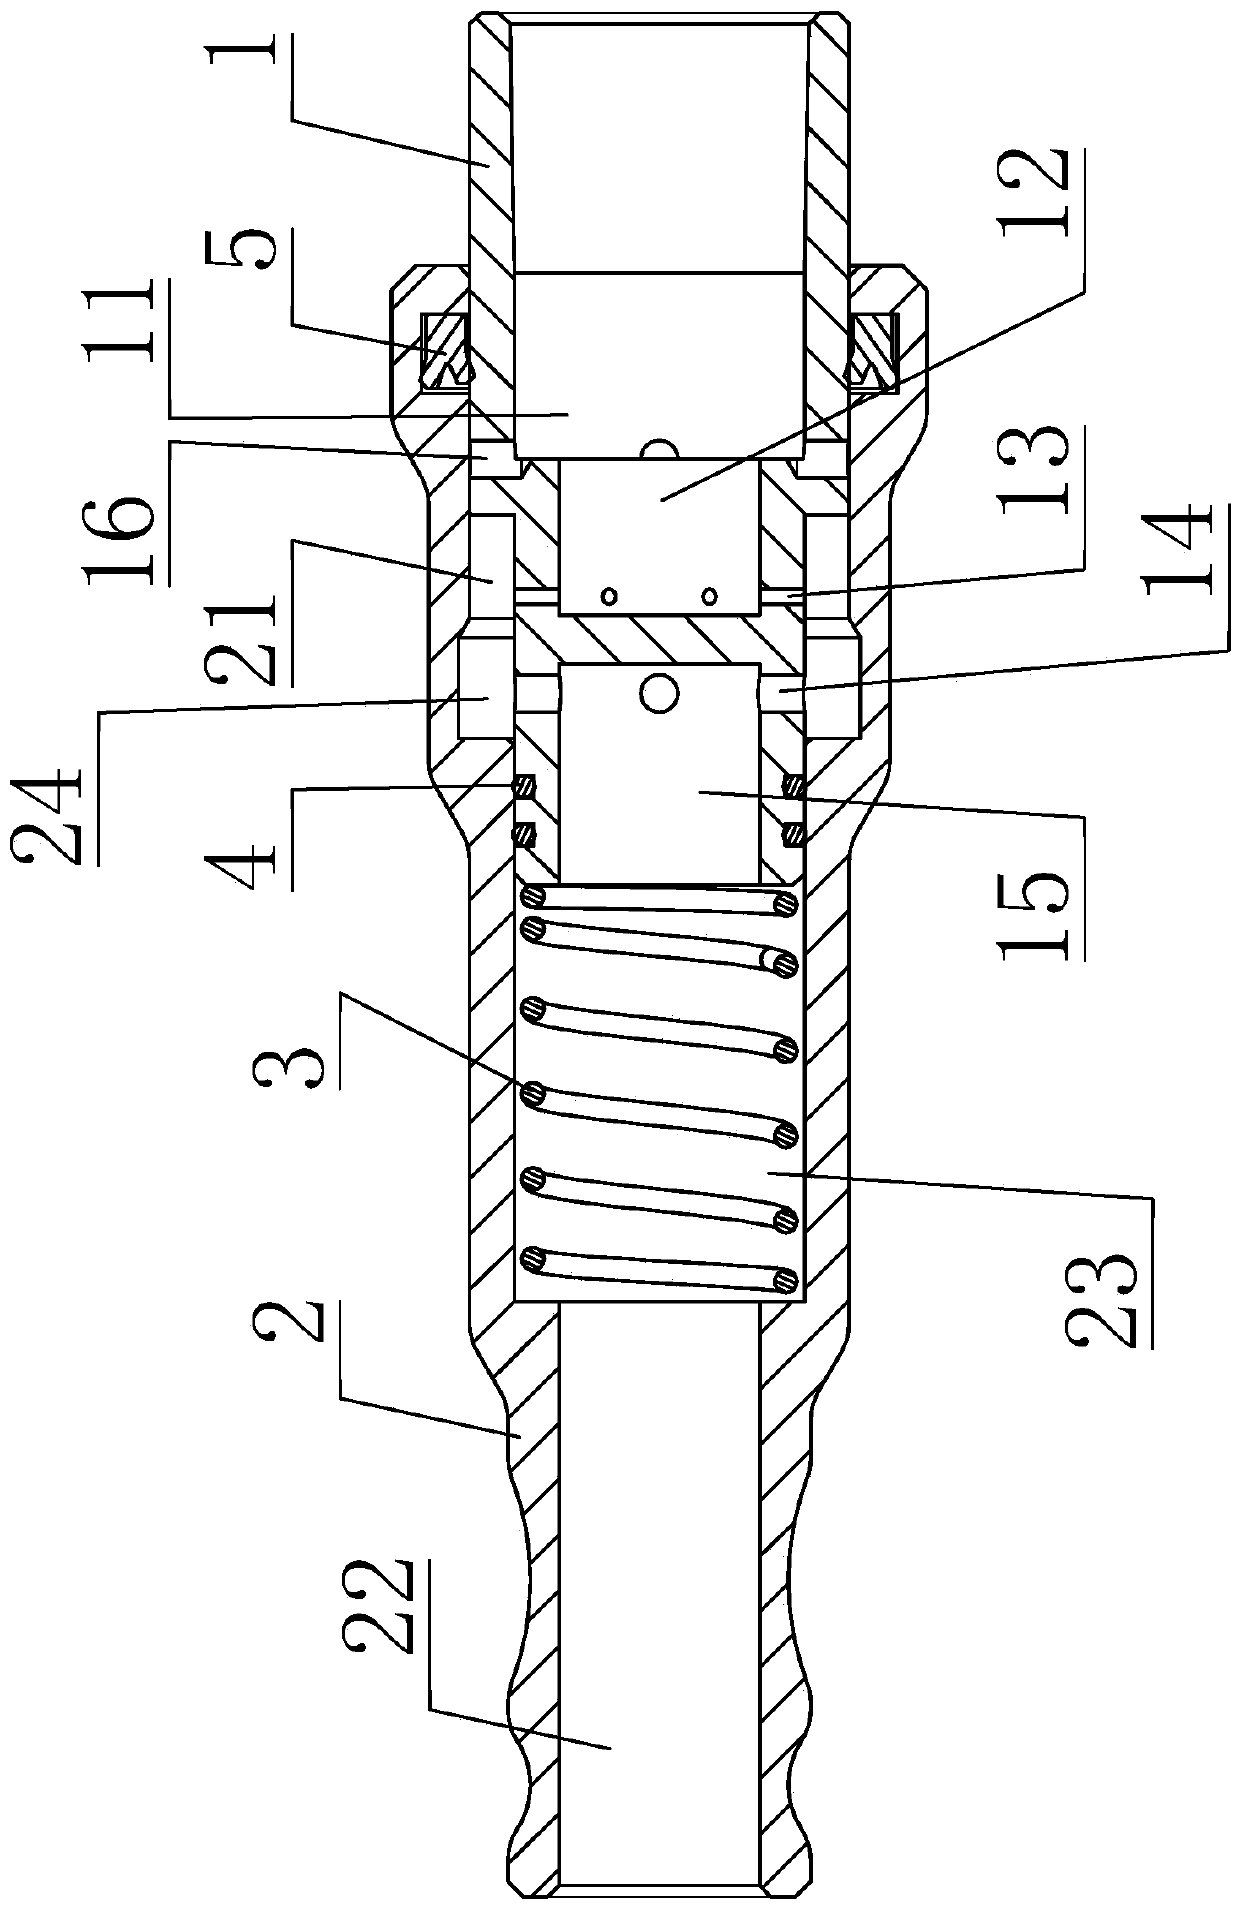 Variable-cavity-volume cigarette holder with tar extruded out in pushing mode